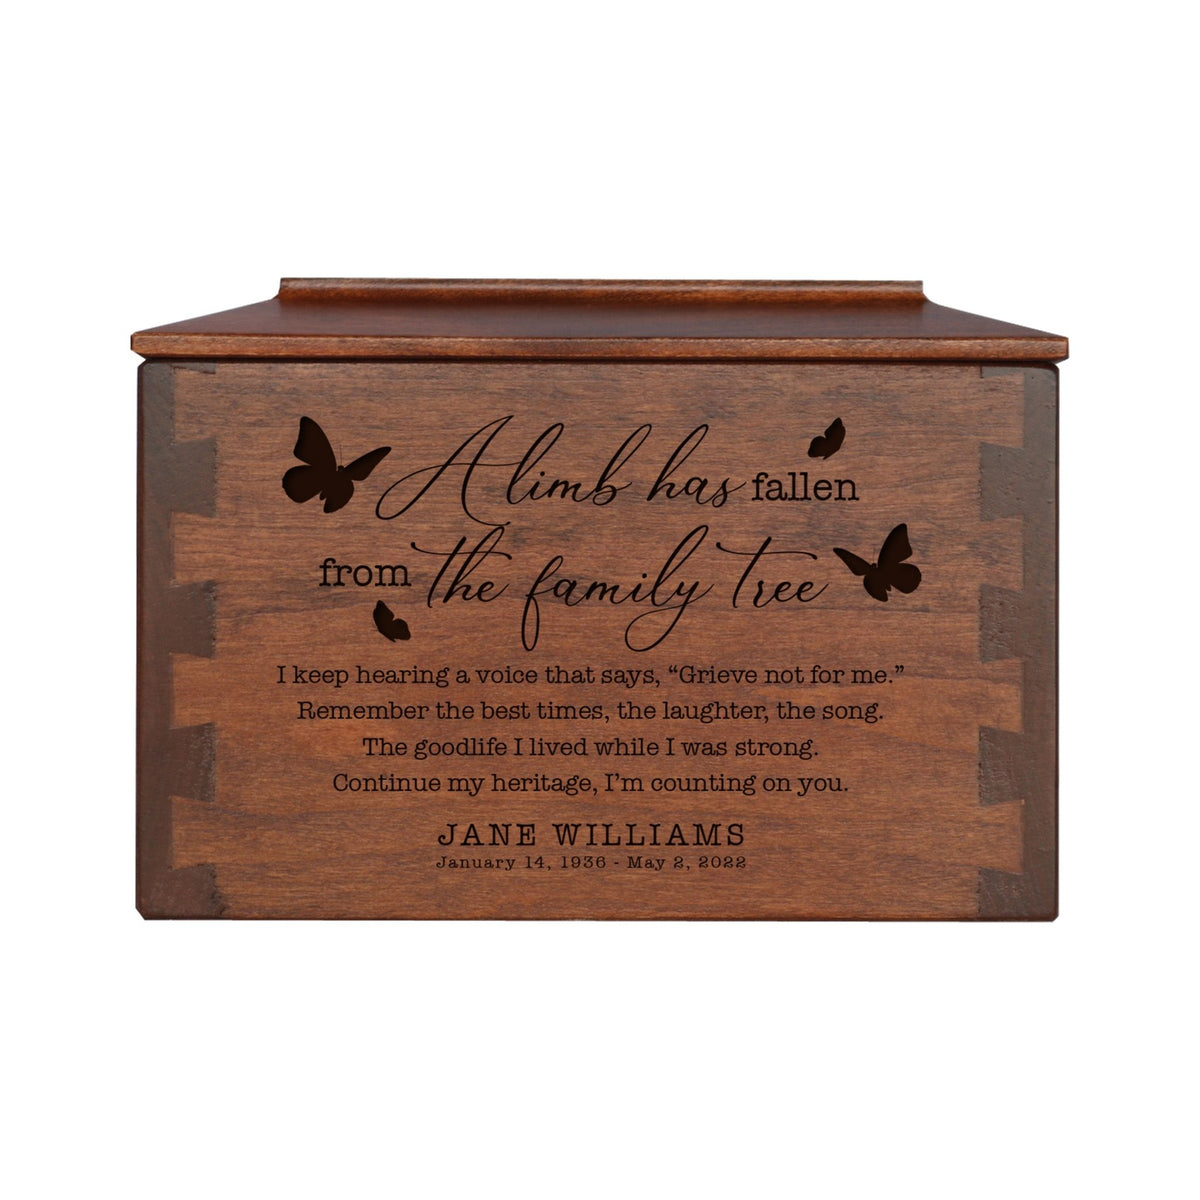 Custom-Engraved Memorial Cremation Small Dovetail Urn For Human Ashes - A Limb Has fallen - LifeSong Milestones